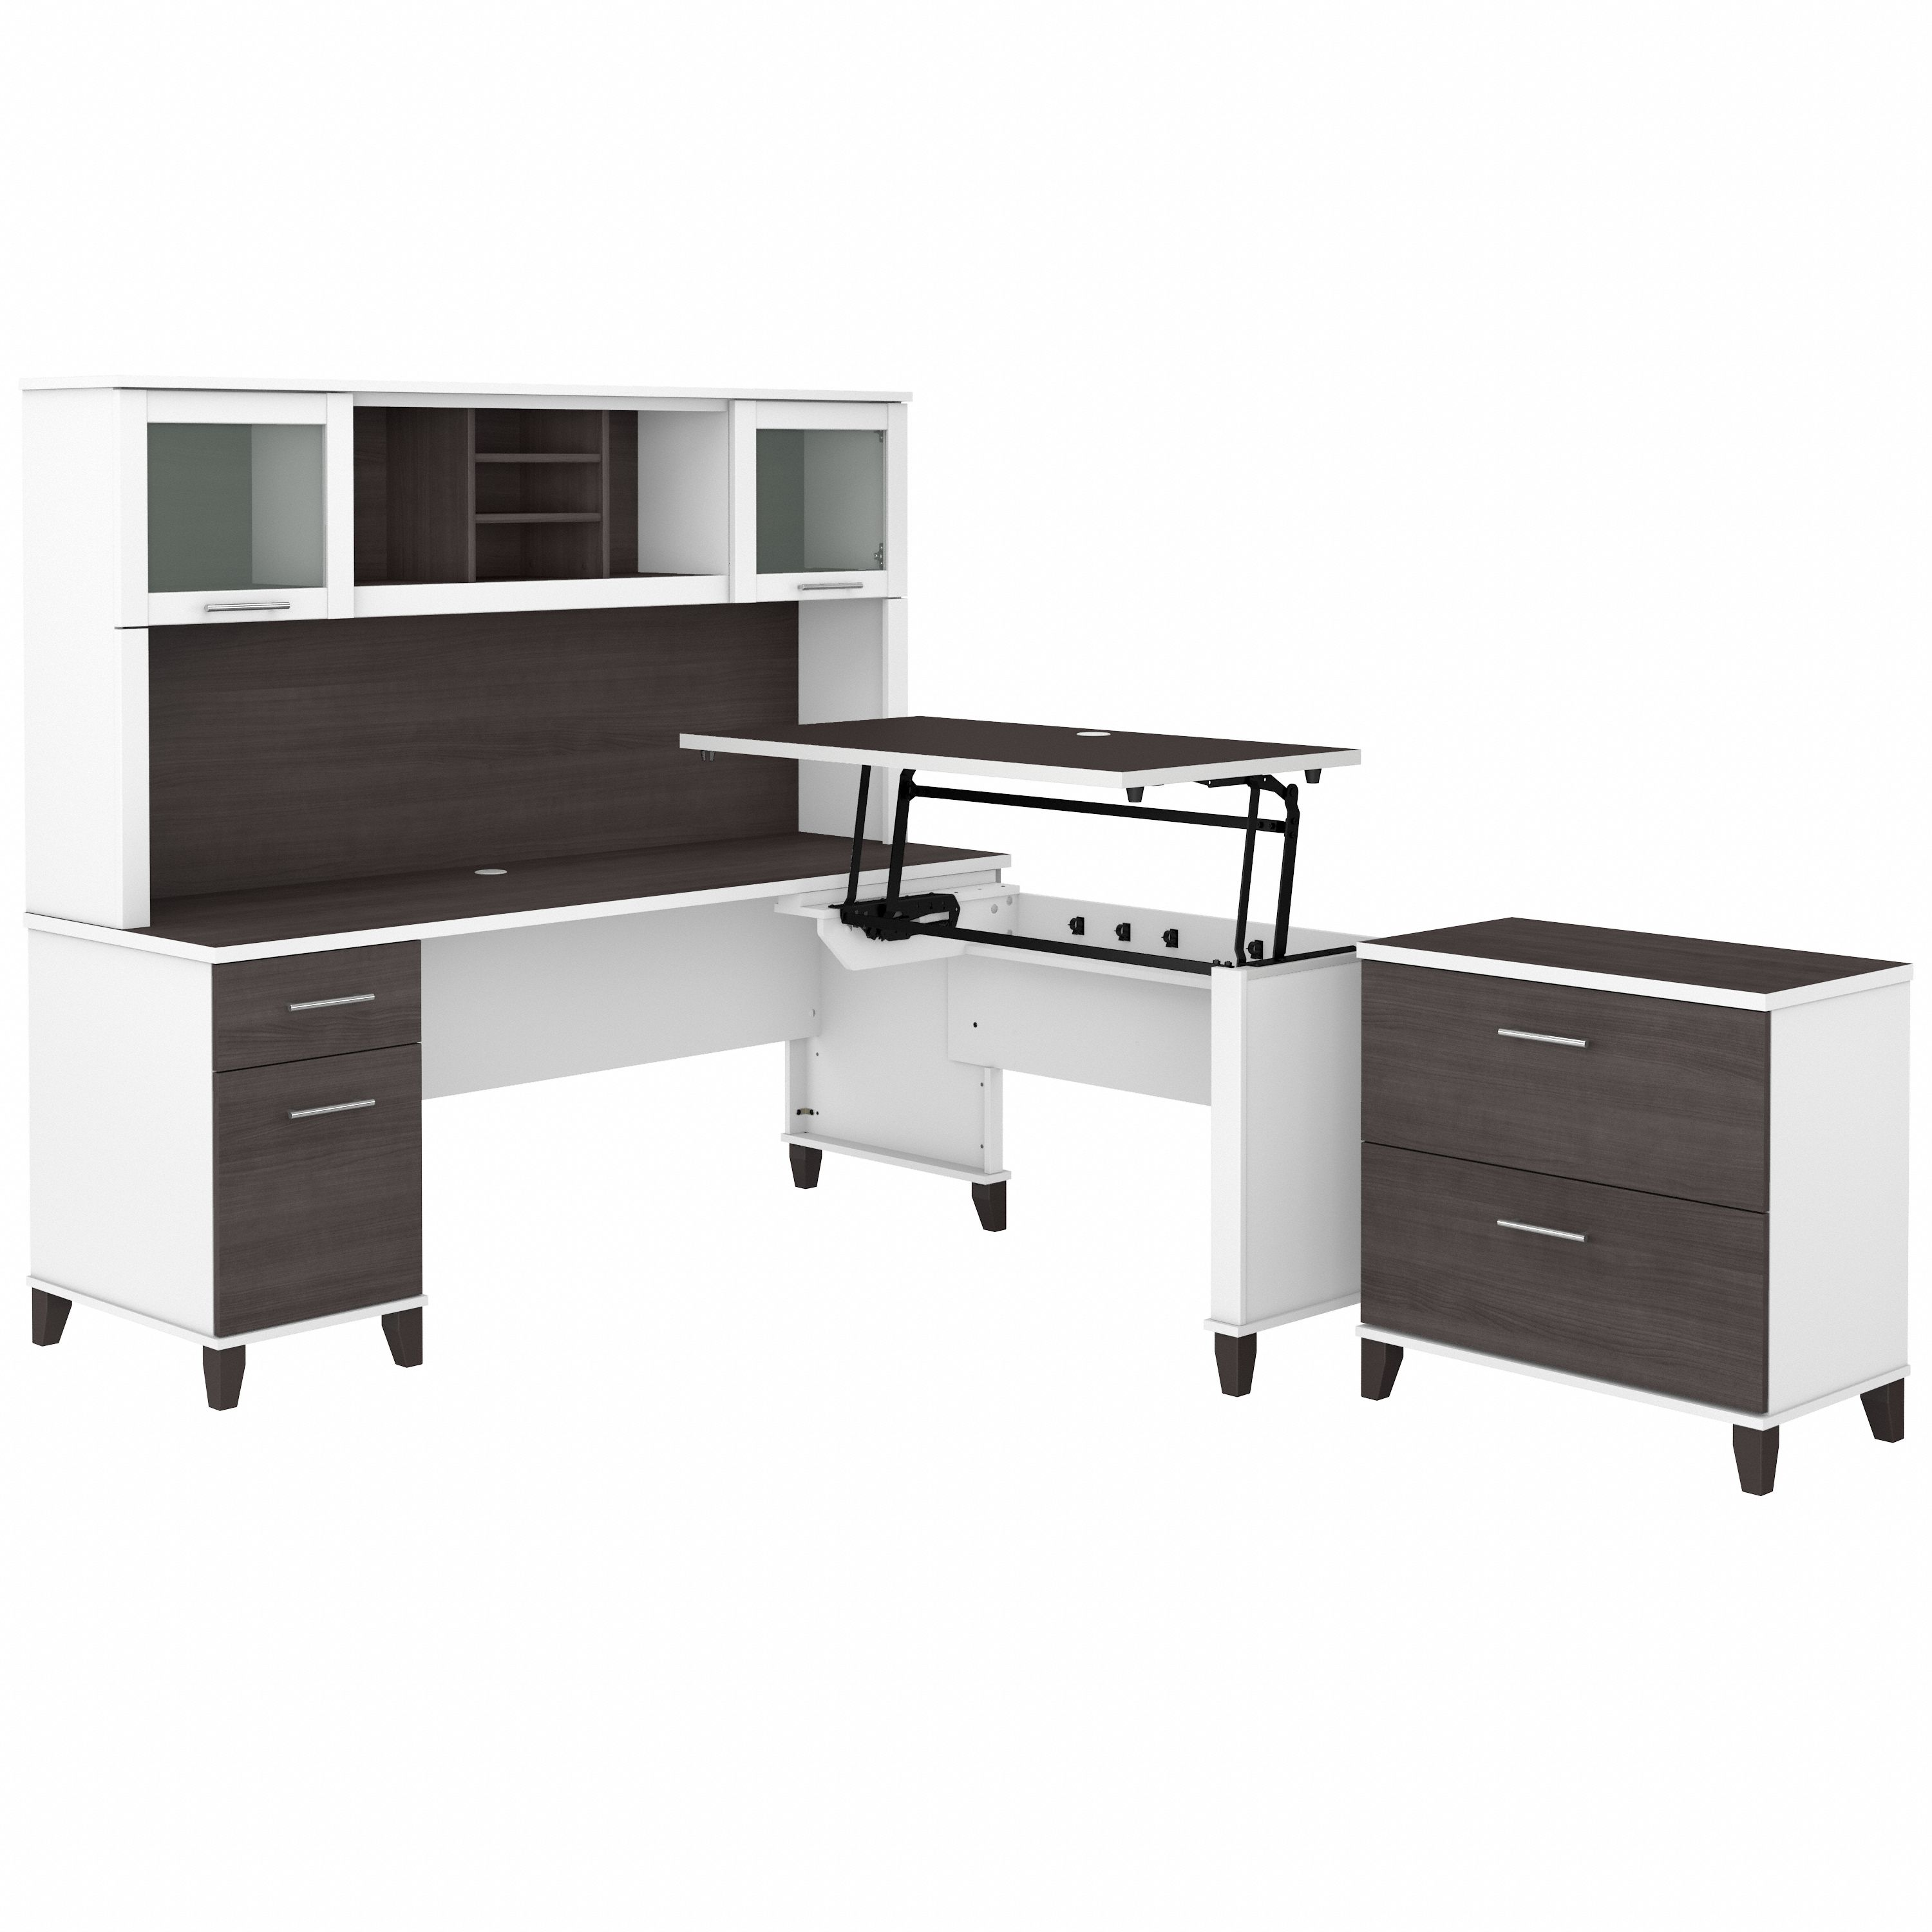 Shop Bush Furniture Somerset 72W 3 Position Sit to Stand L Shaped Desk with Hutch and File Cabinet 02 SET016SGWH #color_storm gray/white